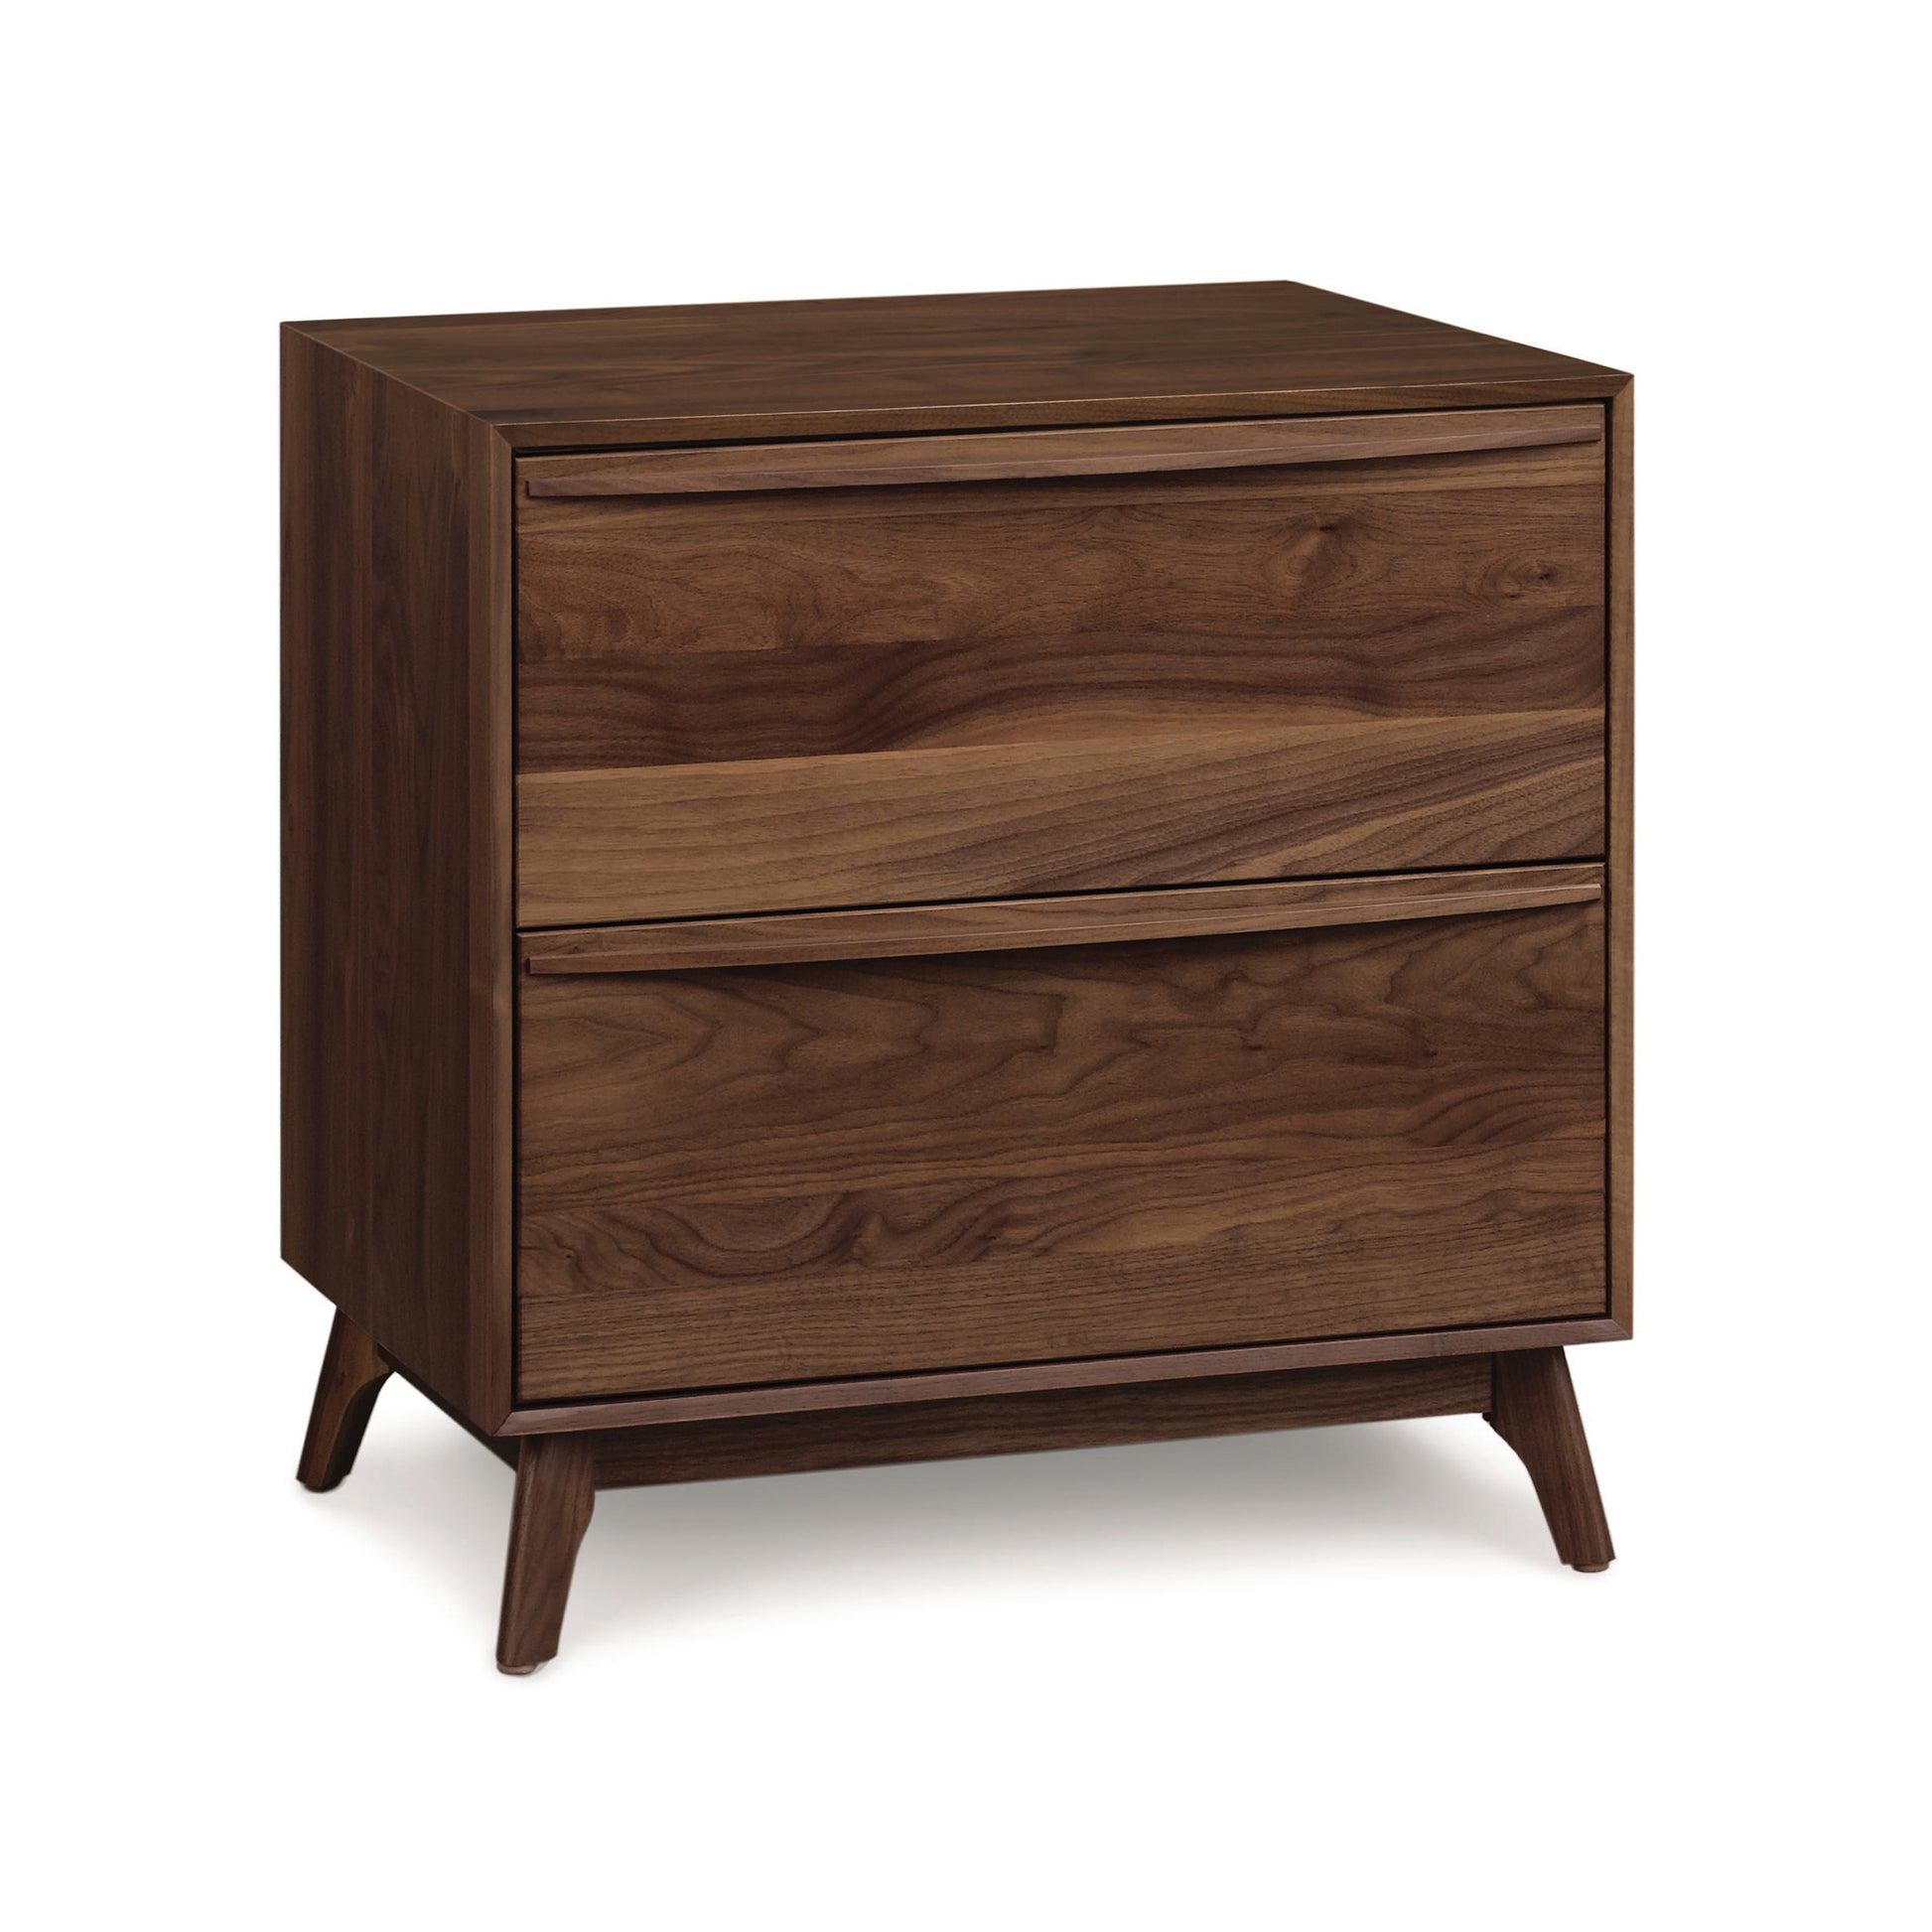 The Copeland Furniture Catalina 2-Drawer Nightstand, handmade in Bradford, seamlessly combines contemporary style with functionality.